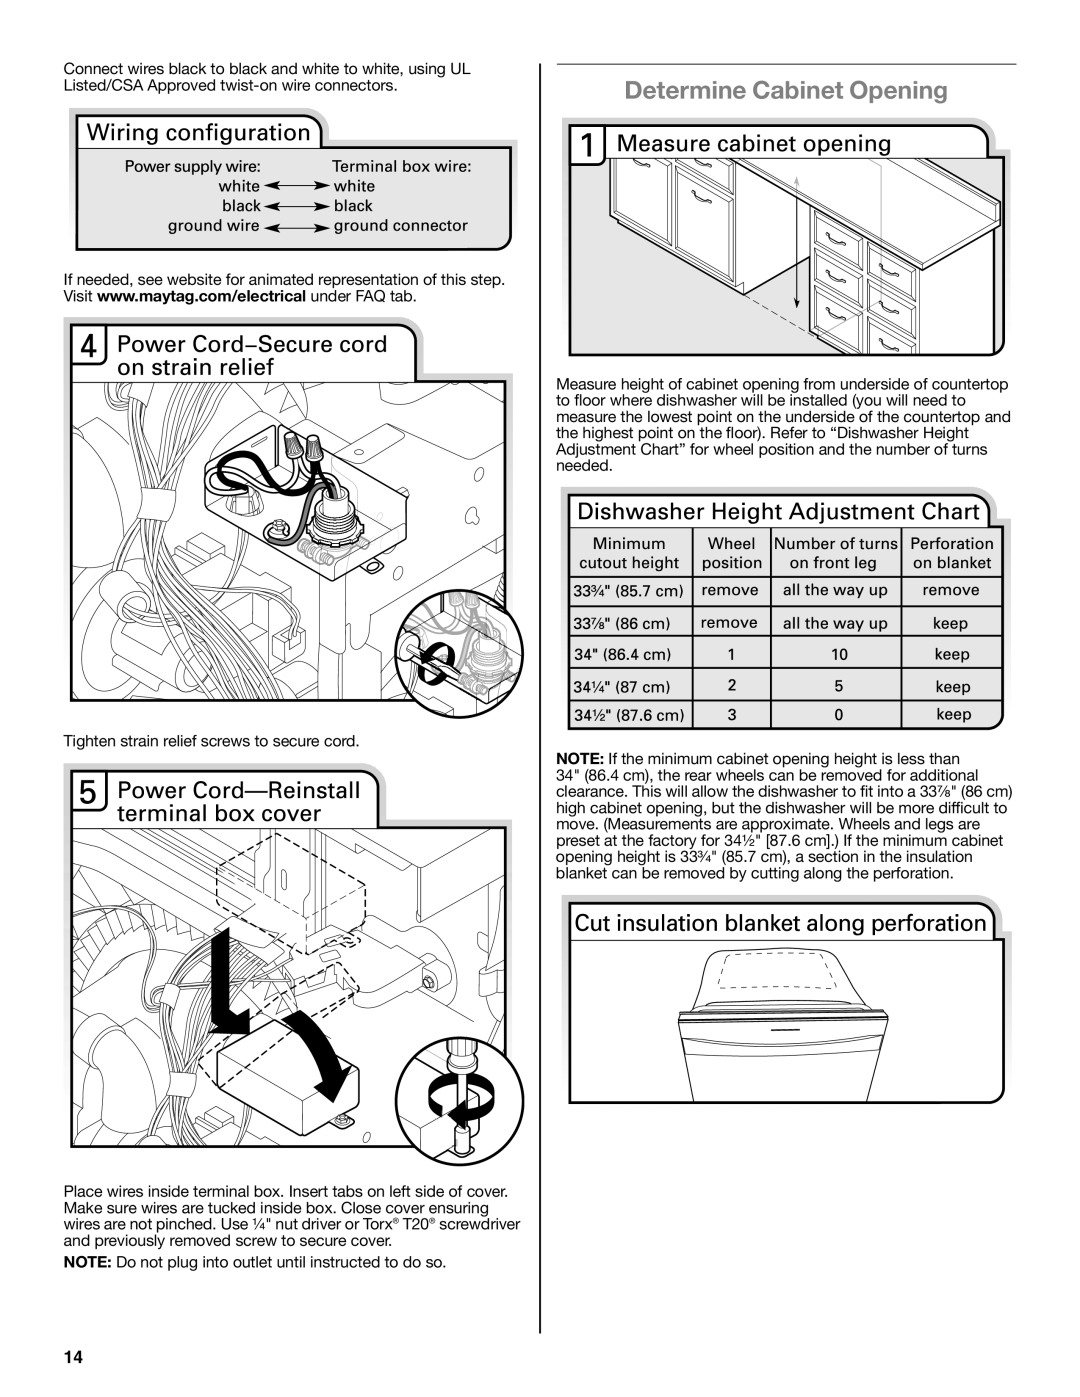 Maytag W10532762A installation instructions Determine Cabinet Opening 